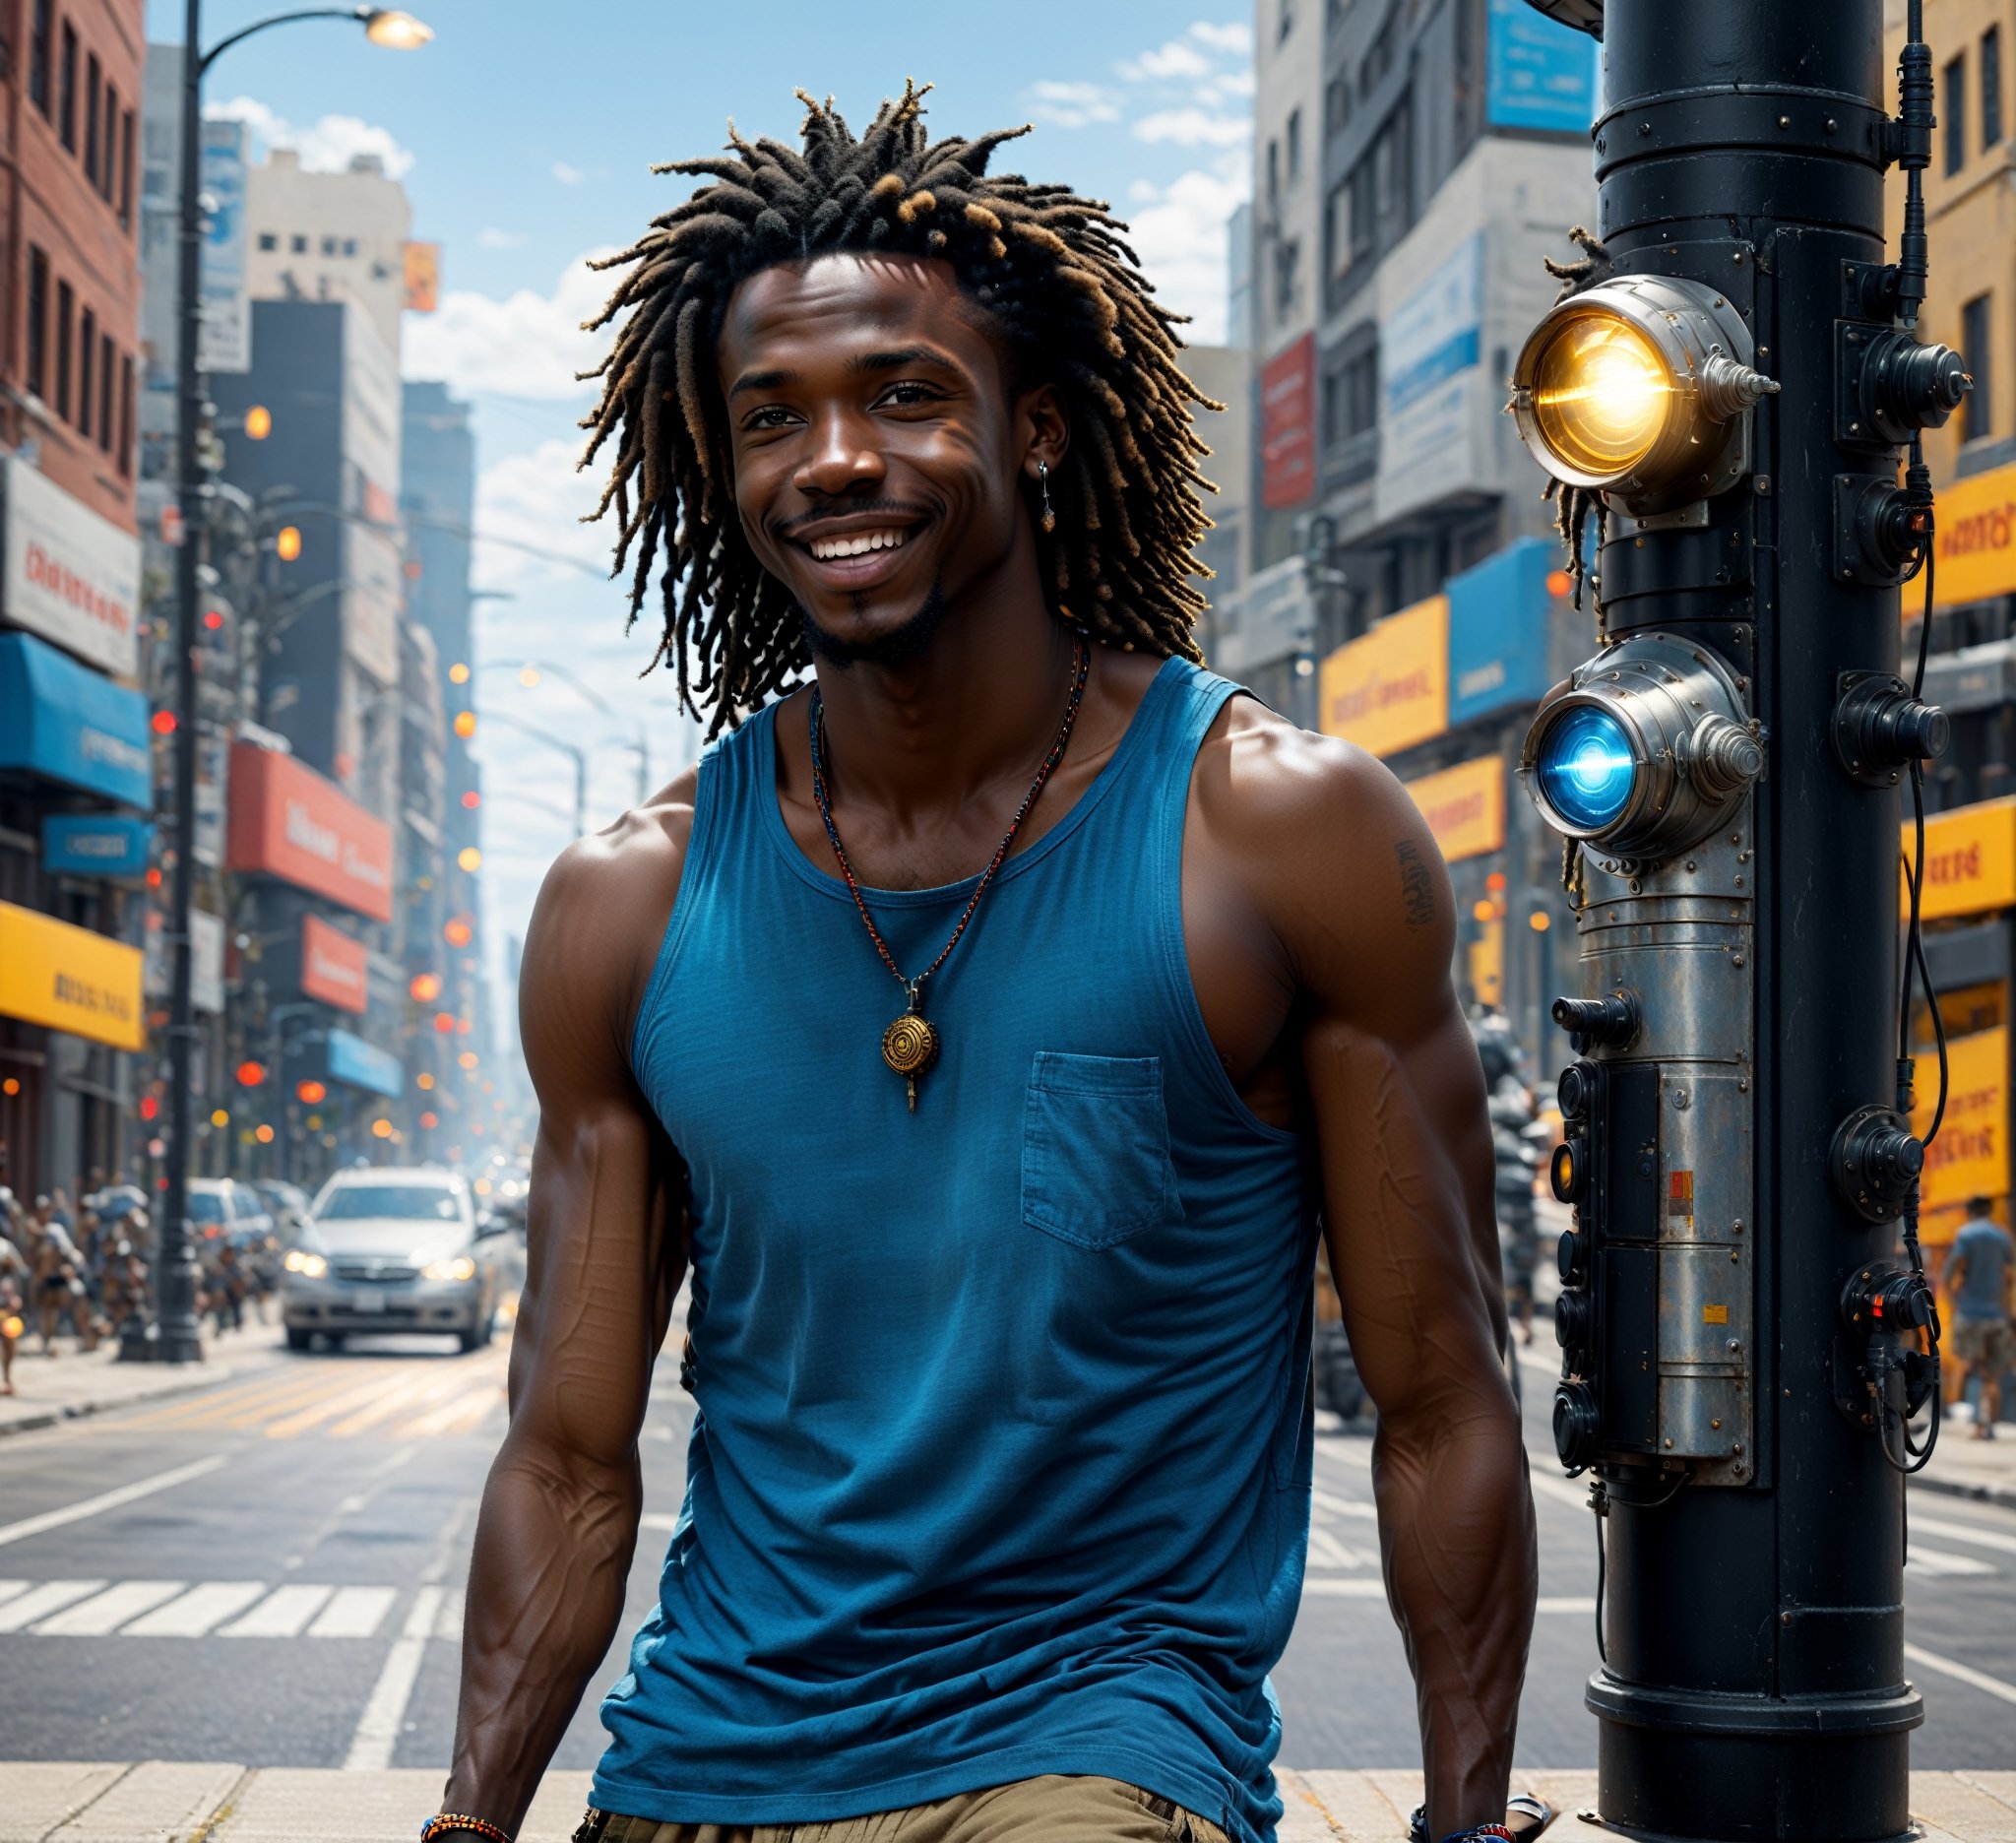 Generate an image of a man leaning against a street light post with his elbow. 

The man is tall and lean revealing his physicality. 

He wears a loose fitting multi-color tank top, cargo shorts and casual shoes. This man has black skin, dread locks and blue eyes. 

The man smiles in such a way as to evoke a kind demeanor and laid back presence, causing one to feel at ease around him. 

solo, 8k resolution photorealistic masterpiece, intricately detailed, cinematic lighting, 8k resolution concept art intricately detailed, complex, expansive, fantastical, detailmaster2,paint,abstact,Photography, wowdk,DonMM4ch1n3W0rld ,DonMM4ch1n3W0rldXL ,Movie Still,detailmaster2